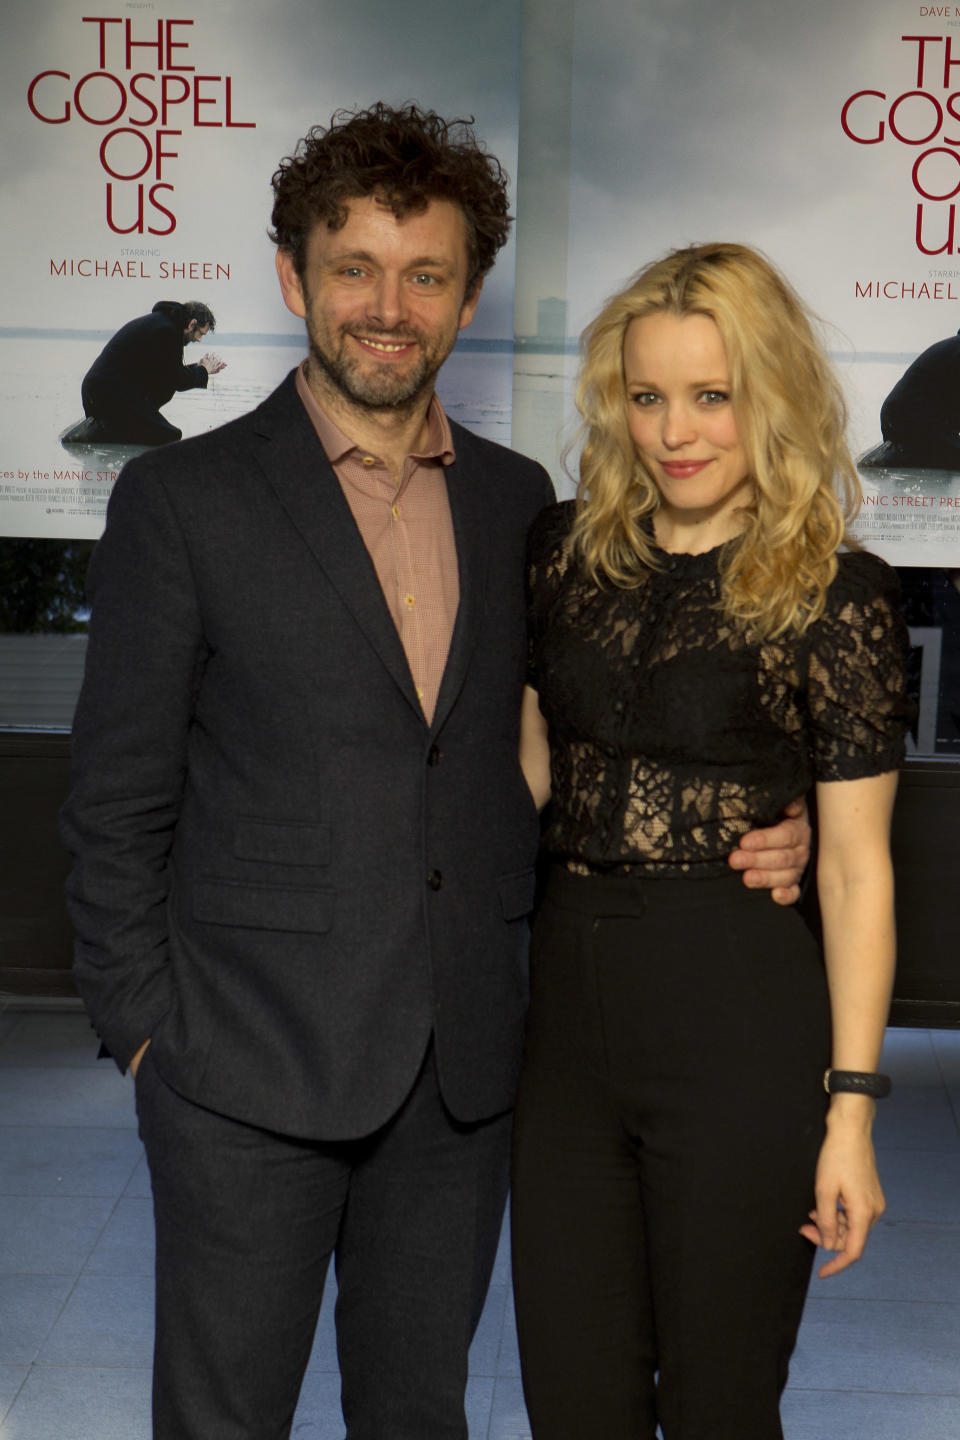 Michael Sheen and Rachel McAdams <a href="http://www.huffingtonpost.com/2013/02/27/rachel-mcadams-michael-sheen-break-up_n_2772707.html?utm_hp_ref=celebrity-splits" target="_blank">broke up in February</a>. They met on the set of "Midnight in Paris" and dated for two years. 